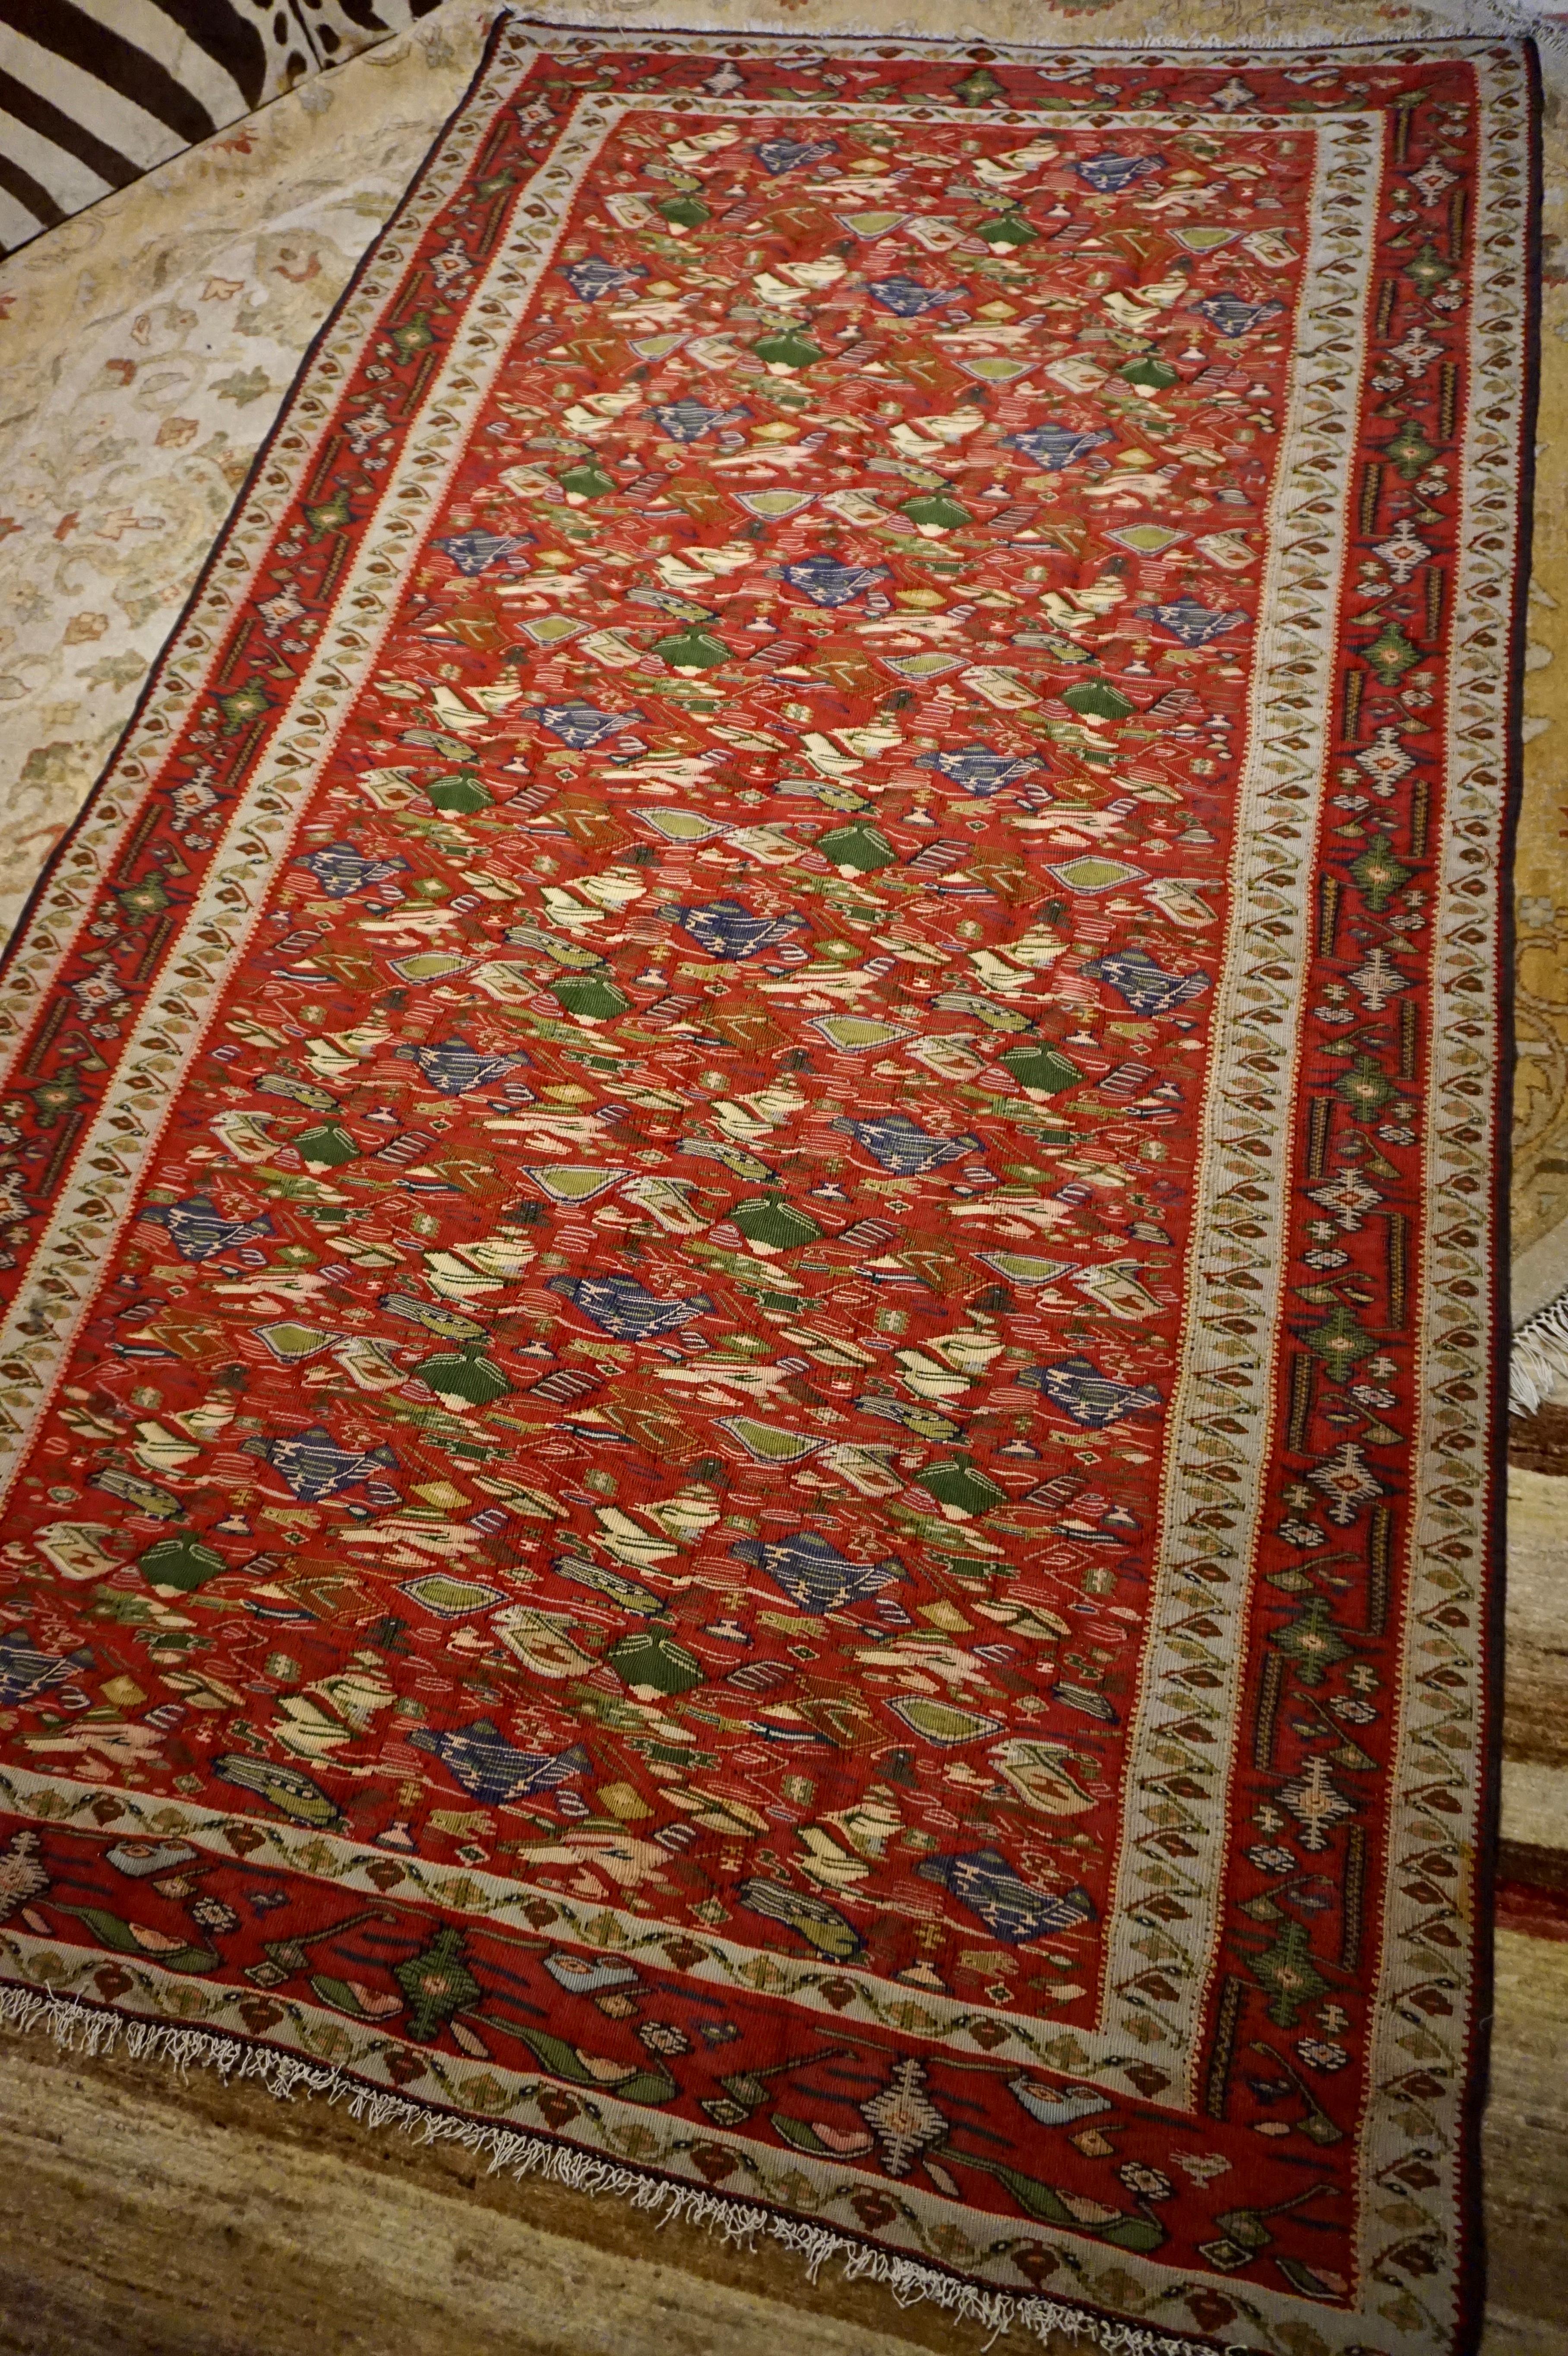 Rare and intricate bird patterns beautifully juxtaposed in a medley of vibrant hues, this kilim exudes refined weaving. An excellent size and unique subject matter makes it a must have statement piece that will not disappoint. Excellent condition